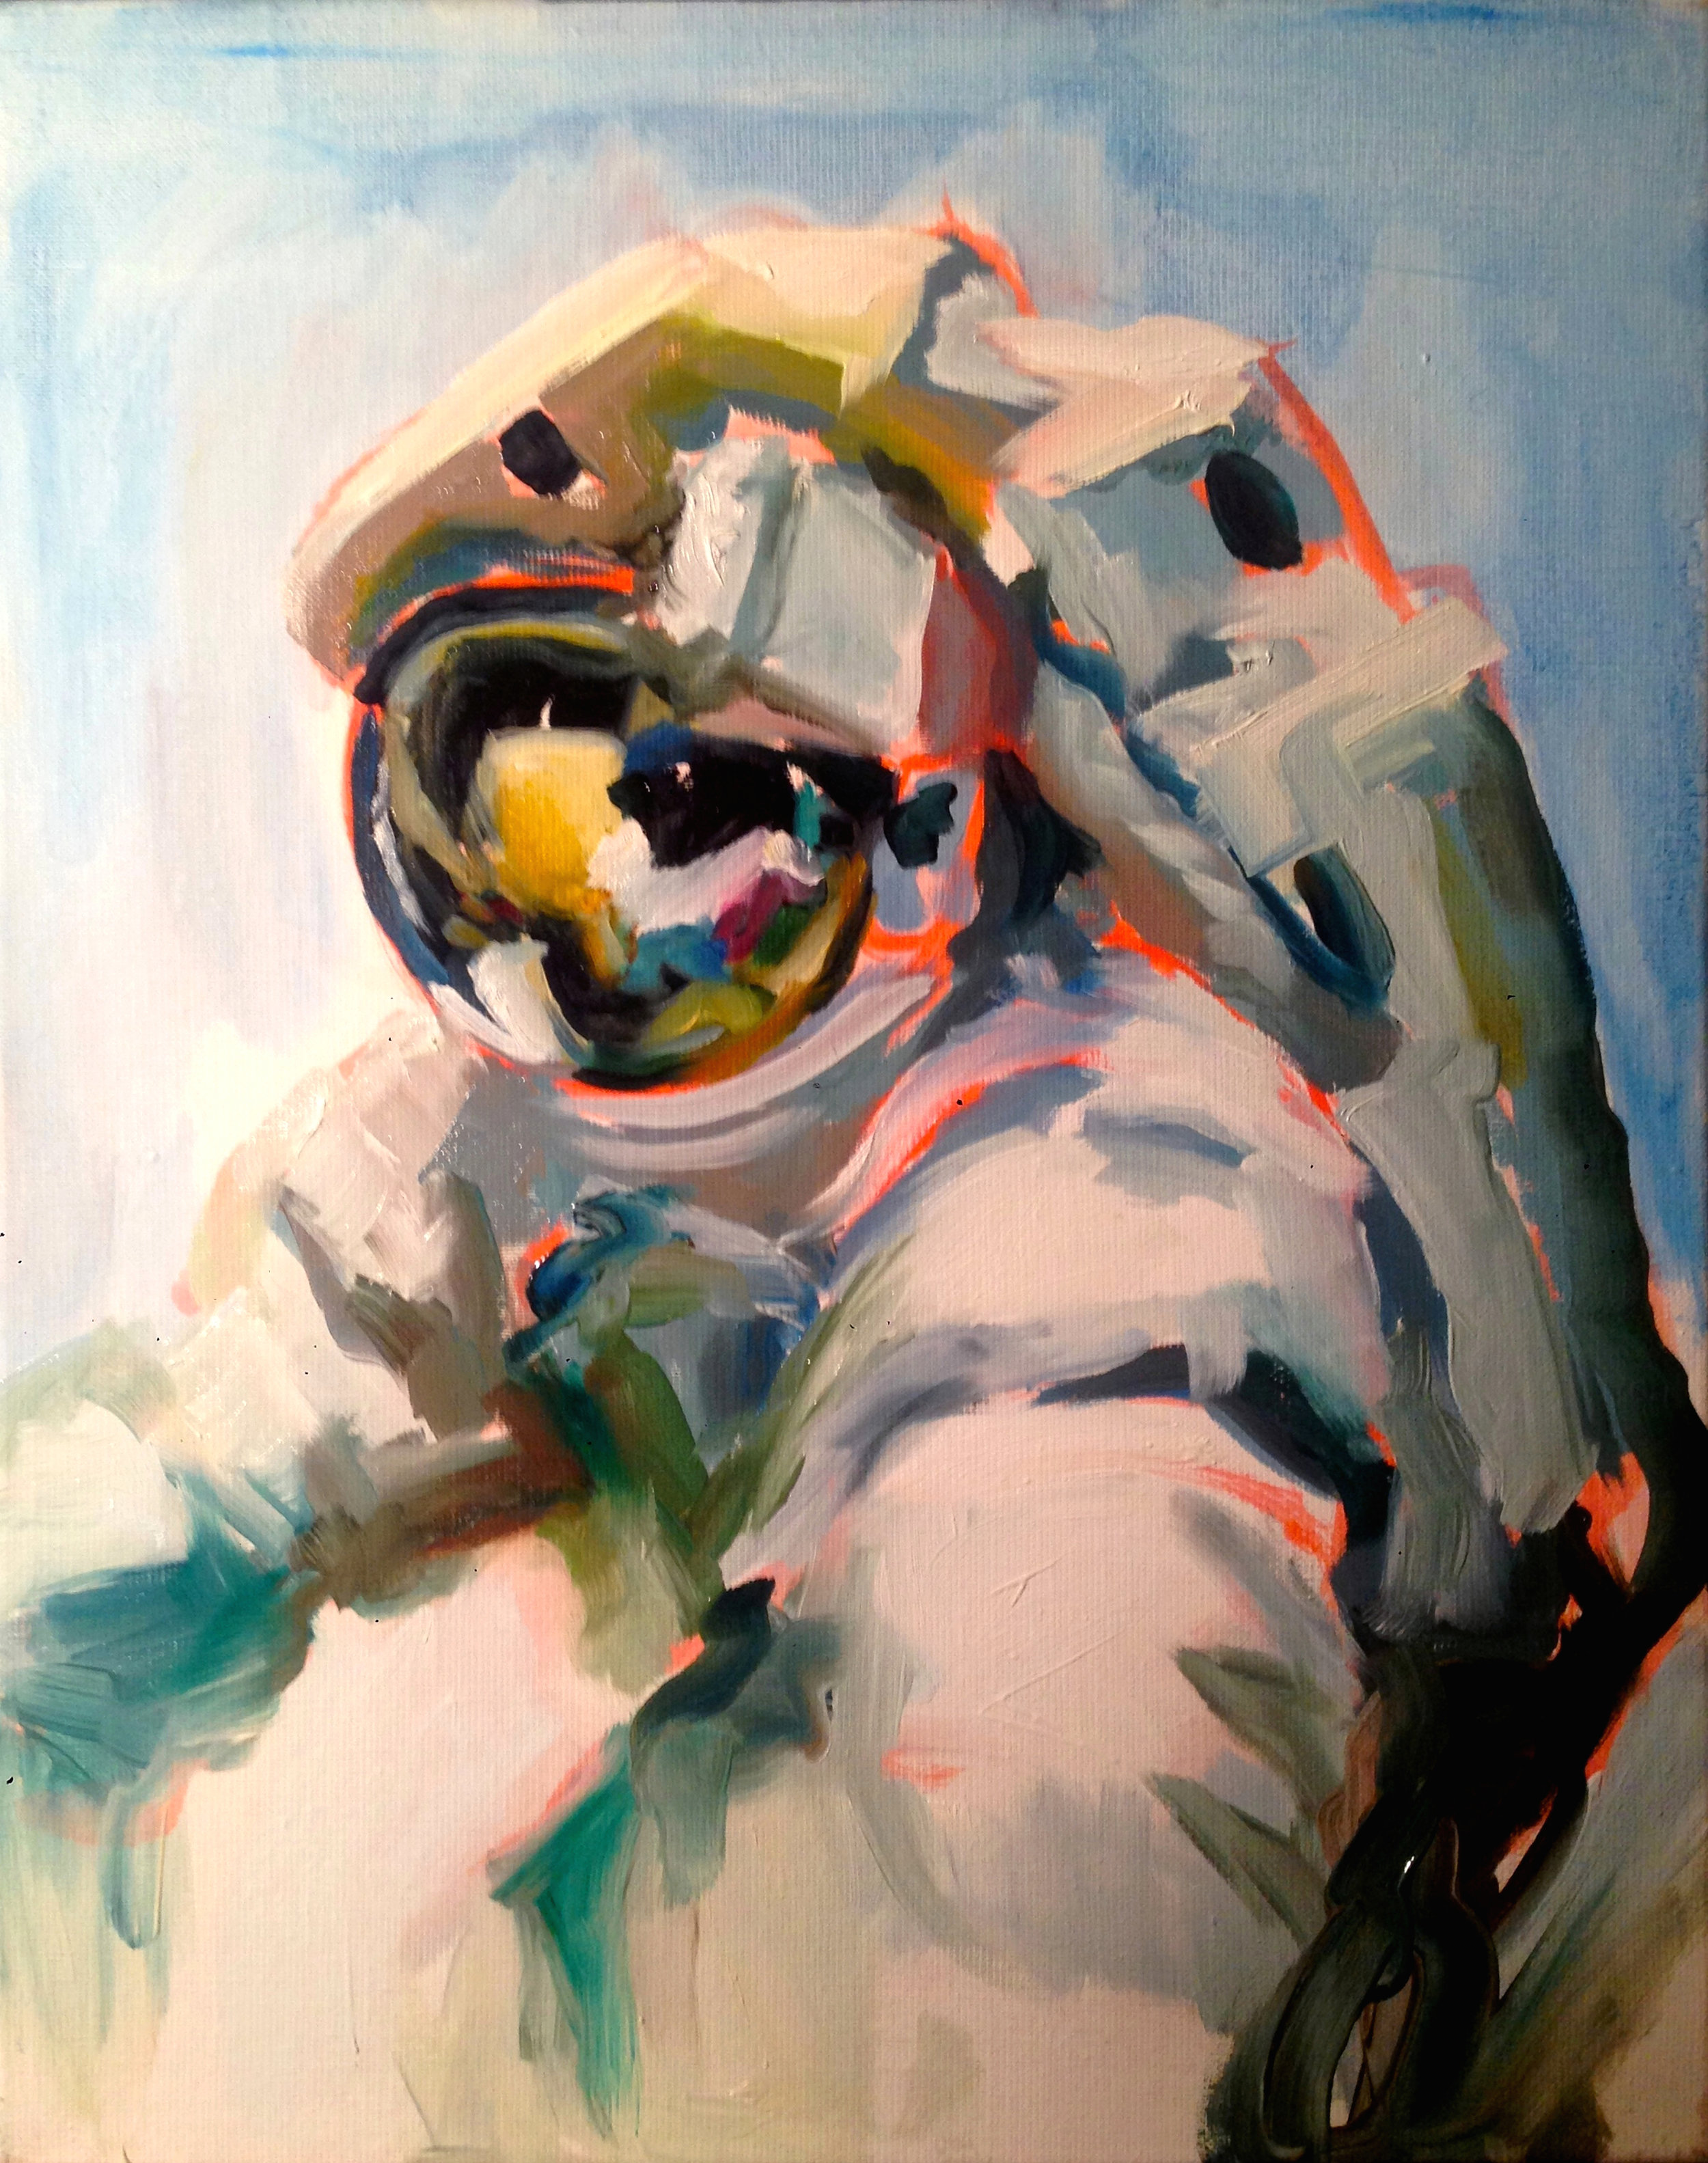  The lonely astronaut    40.6x50.8cm (16x20”) oil on linen  